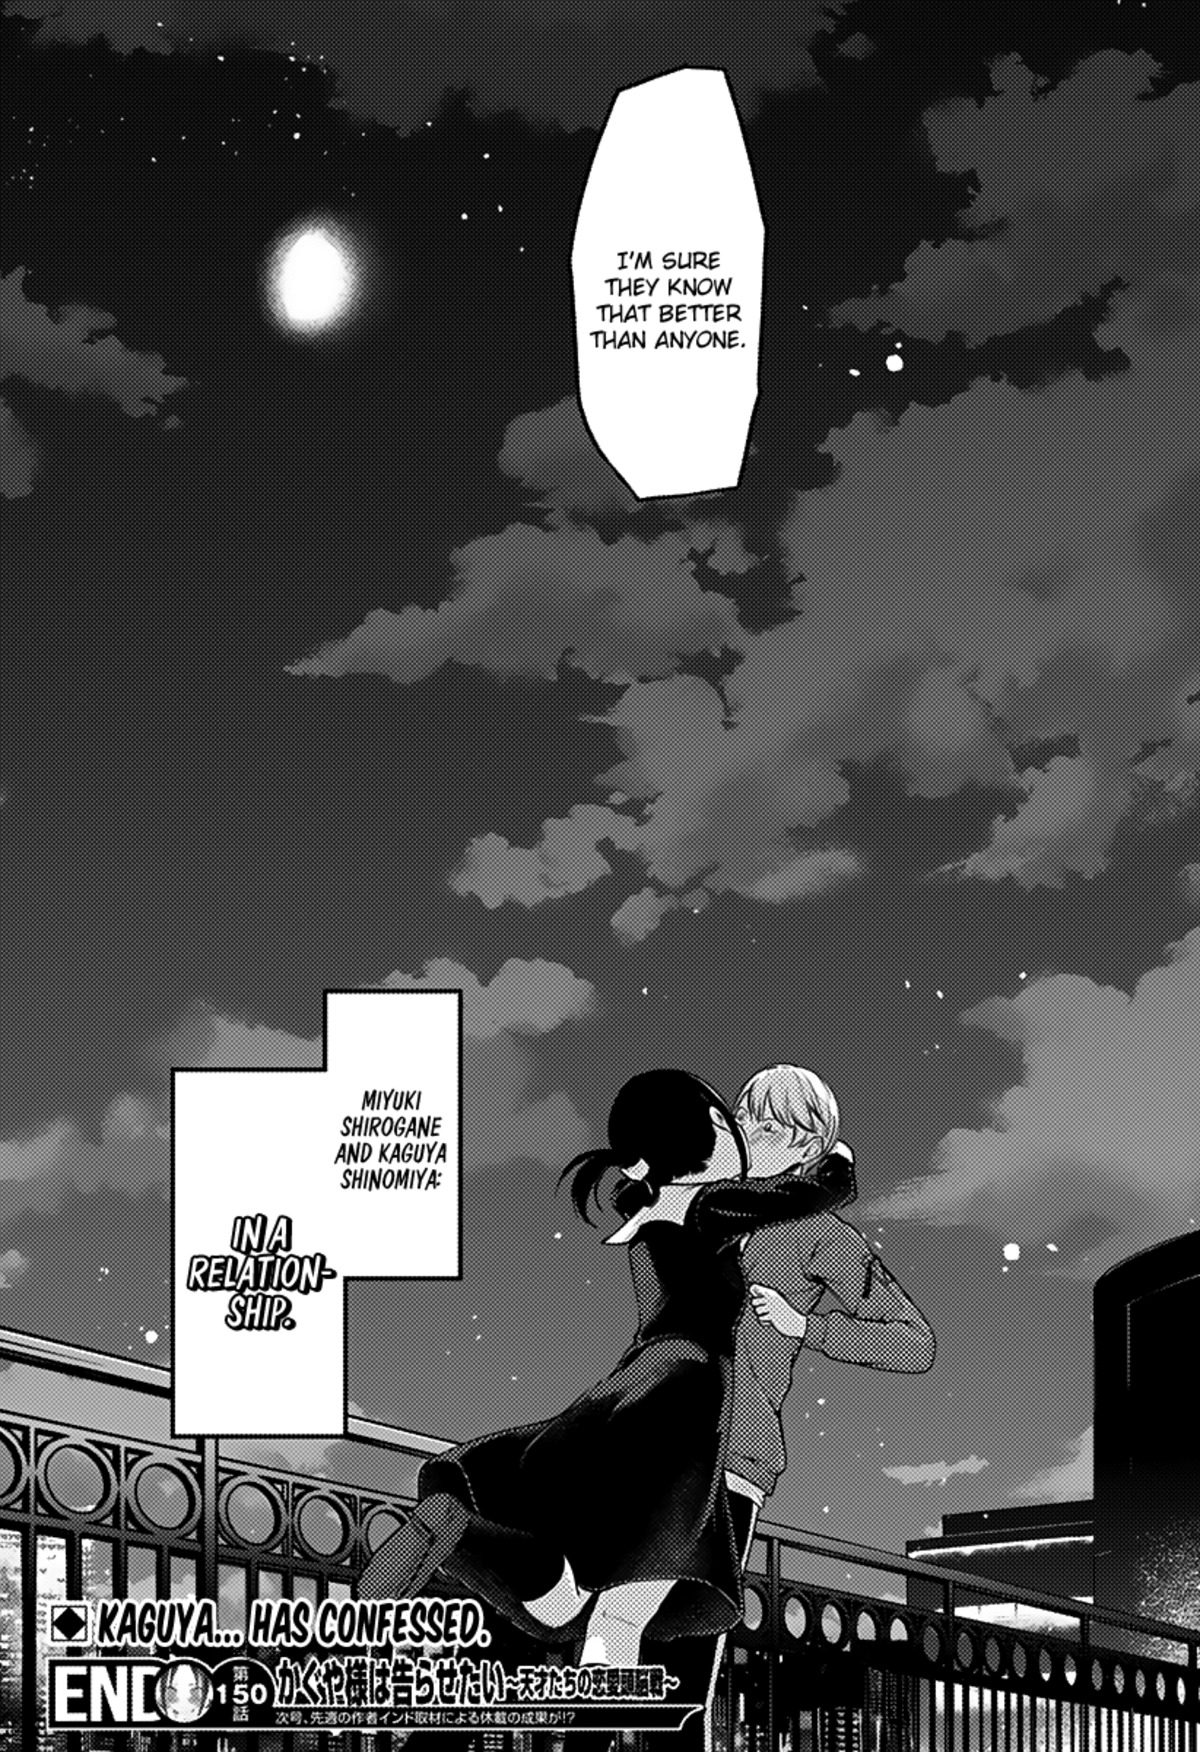 ▲ Kaguya and Shirogane officially started dating in volume 16. The story has moved on to a new stage.